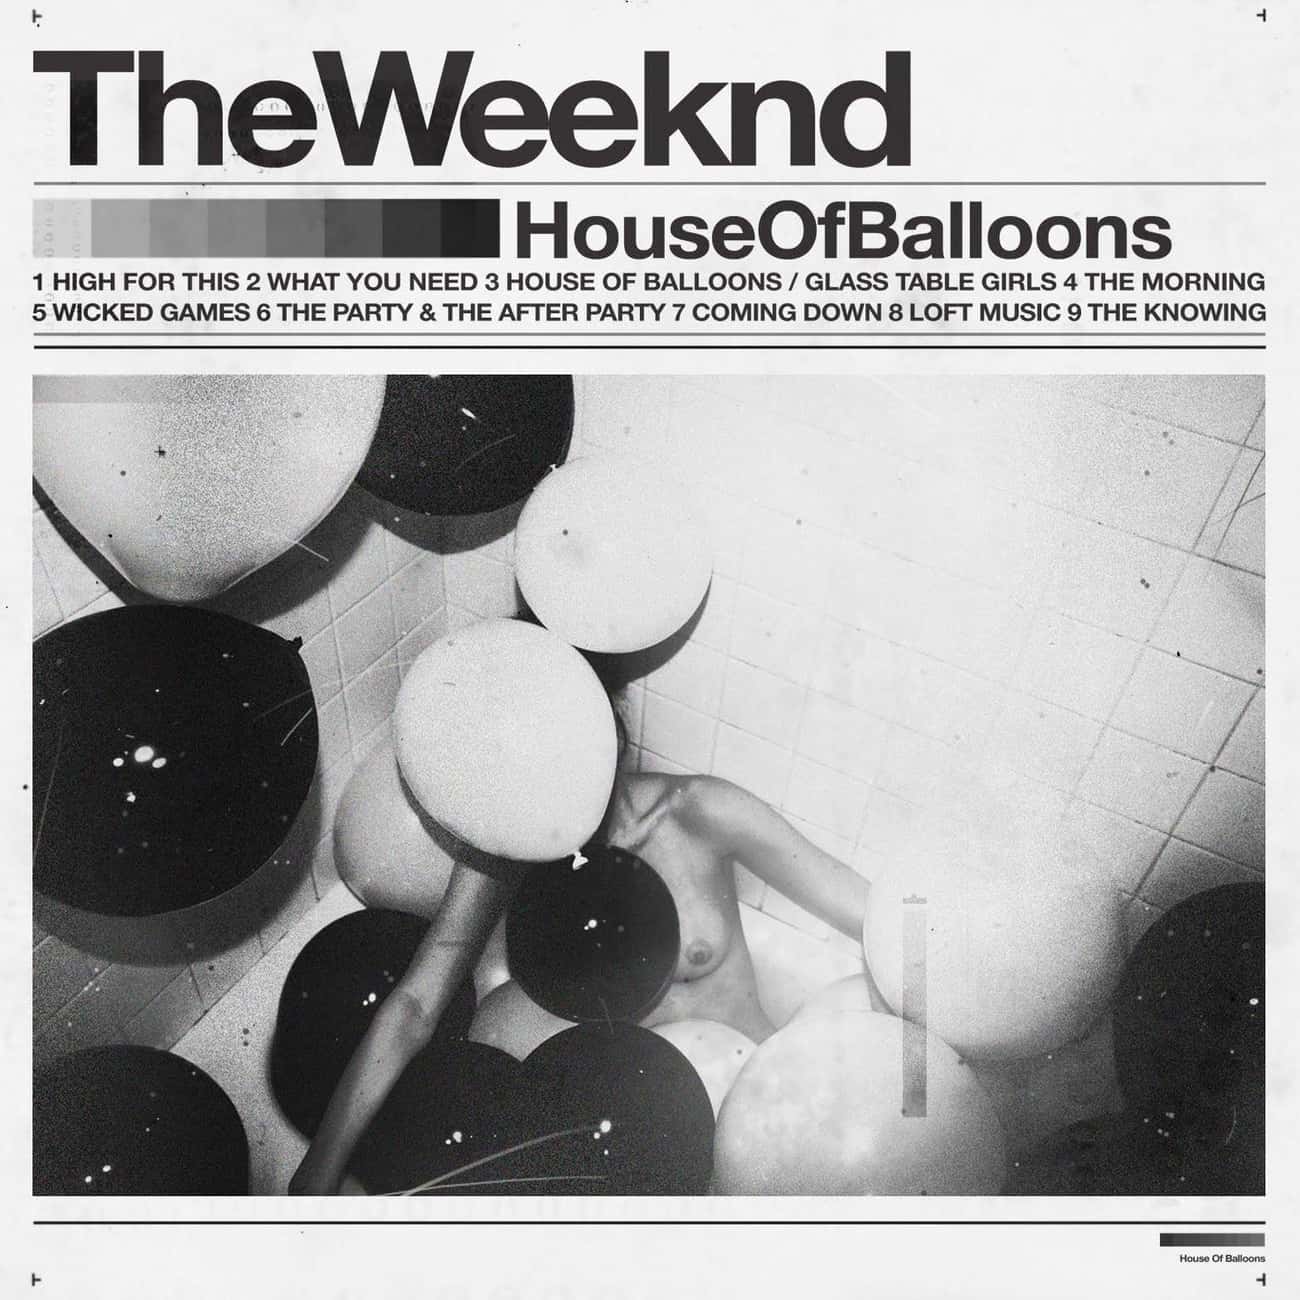 House of Balloons